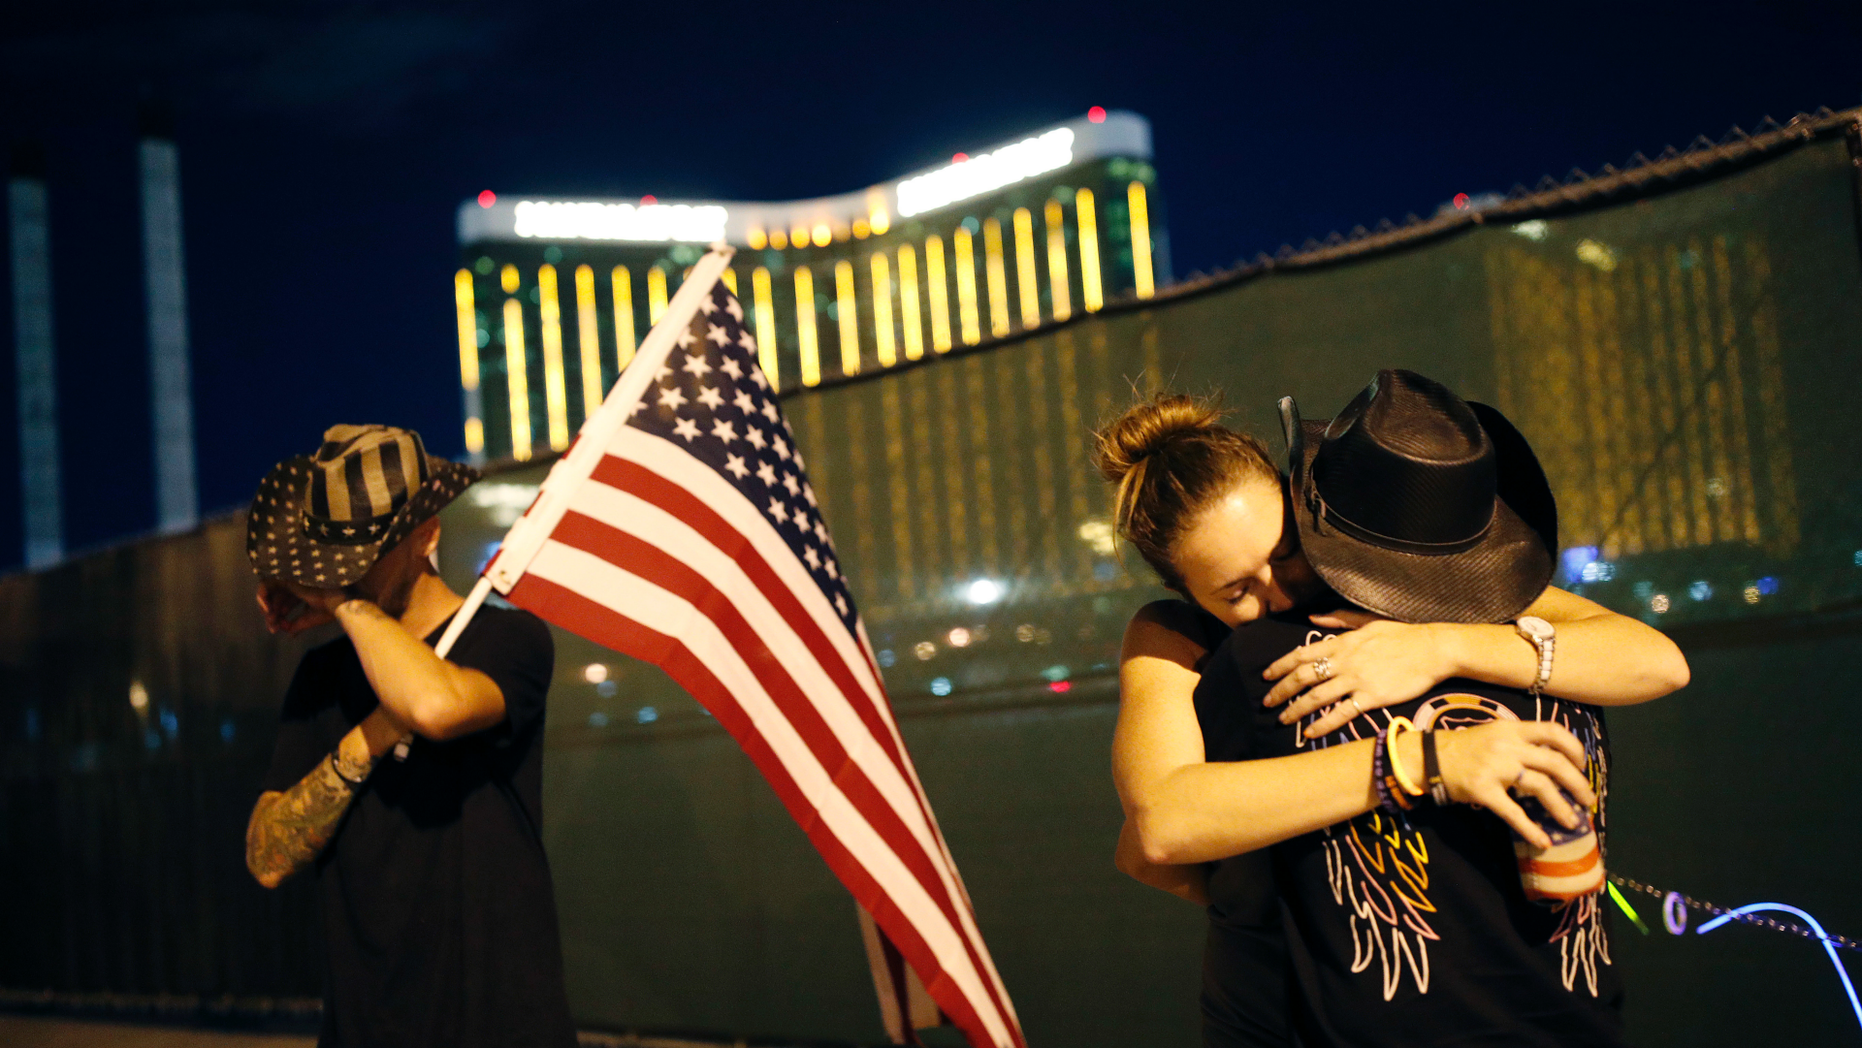 Megan Murphy, while wearing a hat, kisses Cara Knoedler as Kenneth Wright wipes his eyes off the first anniversary of the mass shooting on Monday, October 1, 2018 in Las Vegas. Behind them is the filming site. Hundreds of mass shooting survivors in Las Vegas formed a human chain around the closed site of a country music festival where an armed gunman opened fire on October 1, 2017. (AP Photo / John Locher)